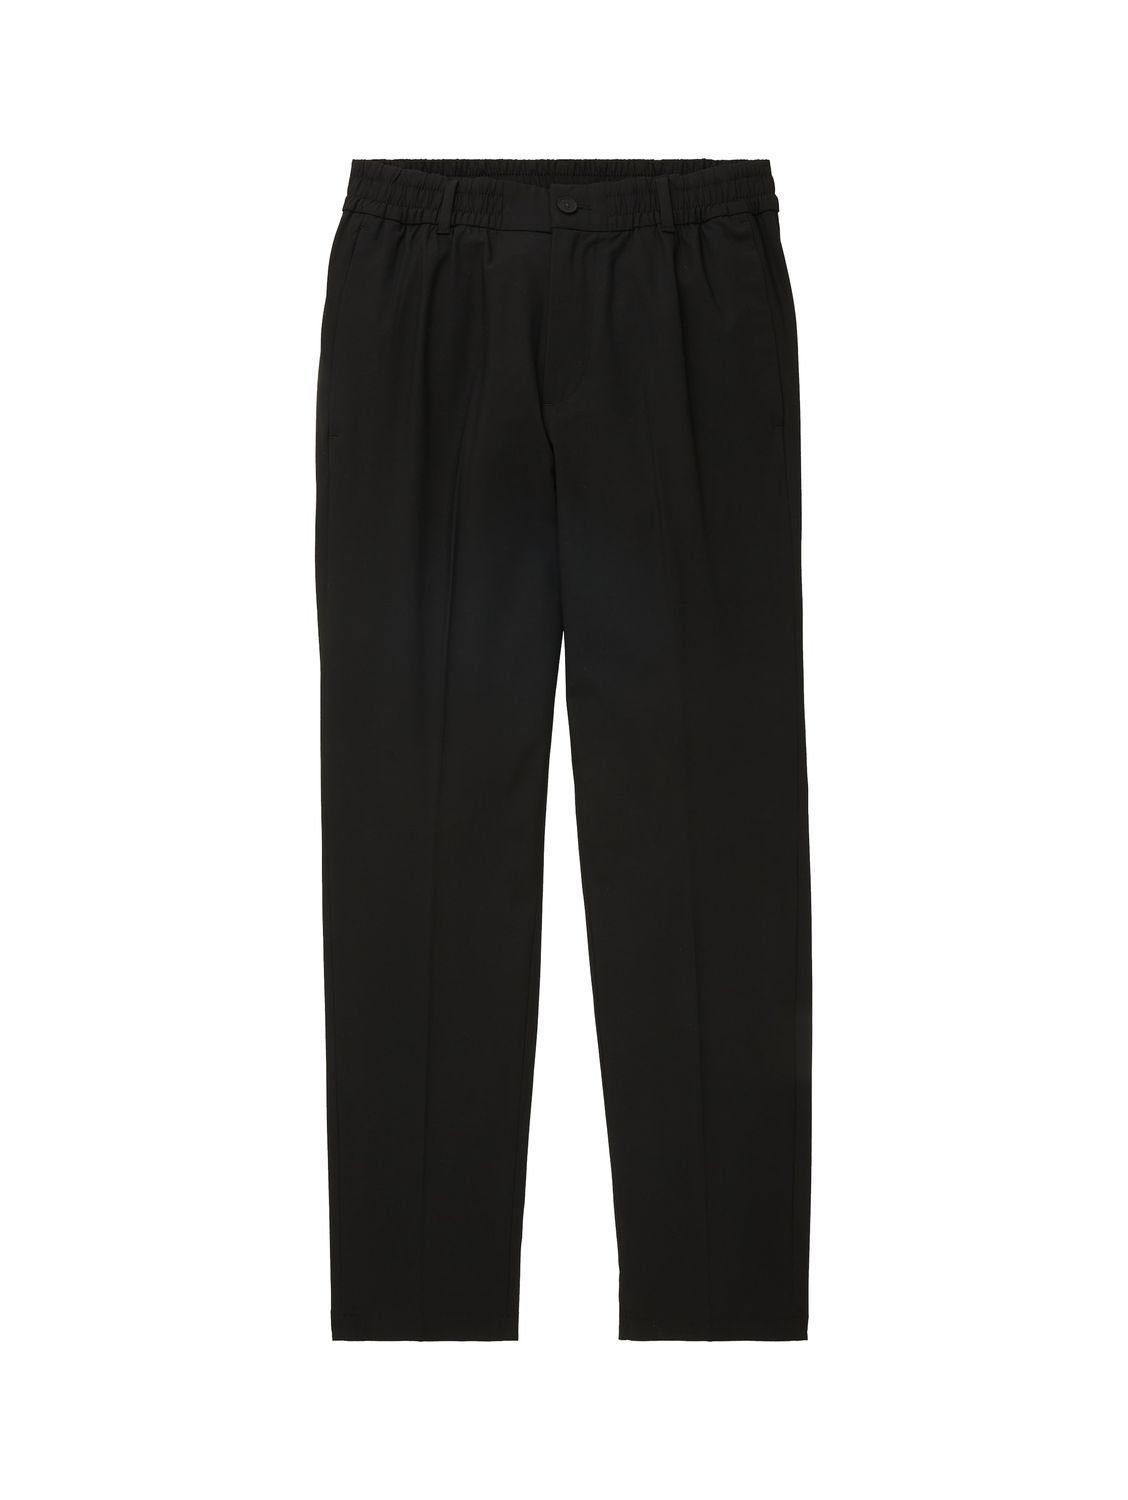 TOM TAILOR Denim Chinohose RELAXED TAPERED CHINO mit Stretch Black 29999